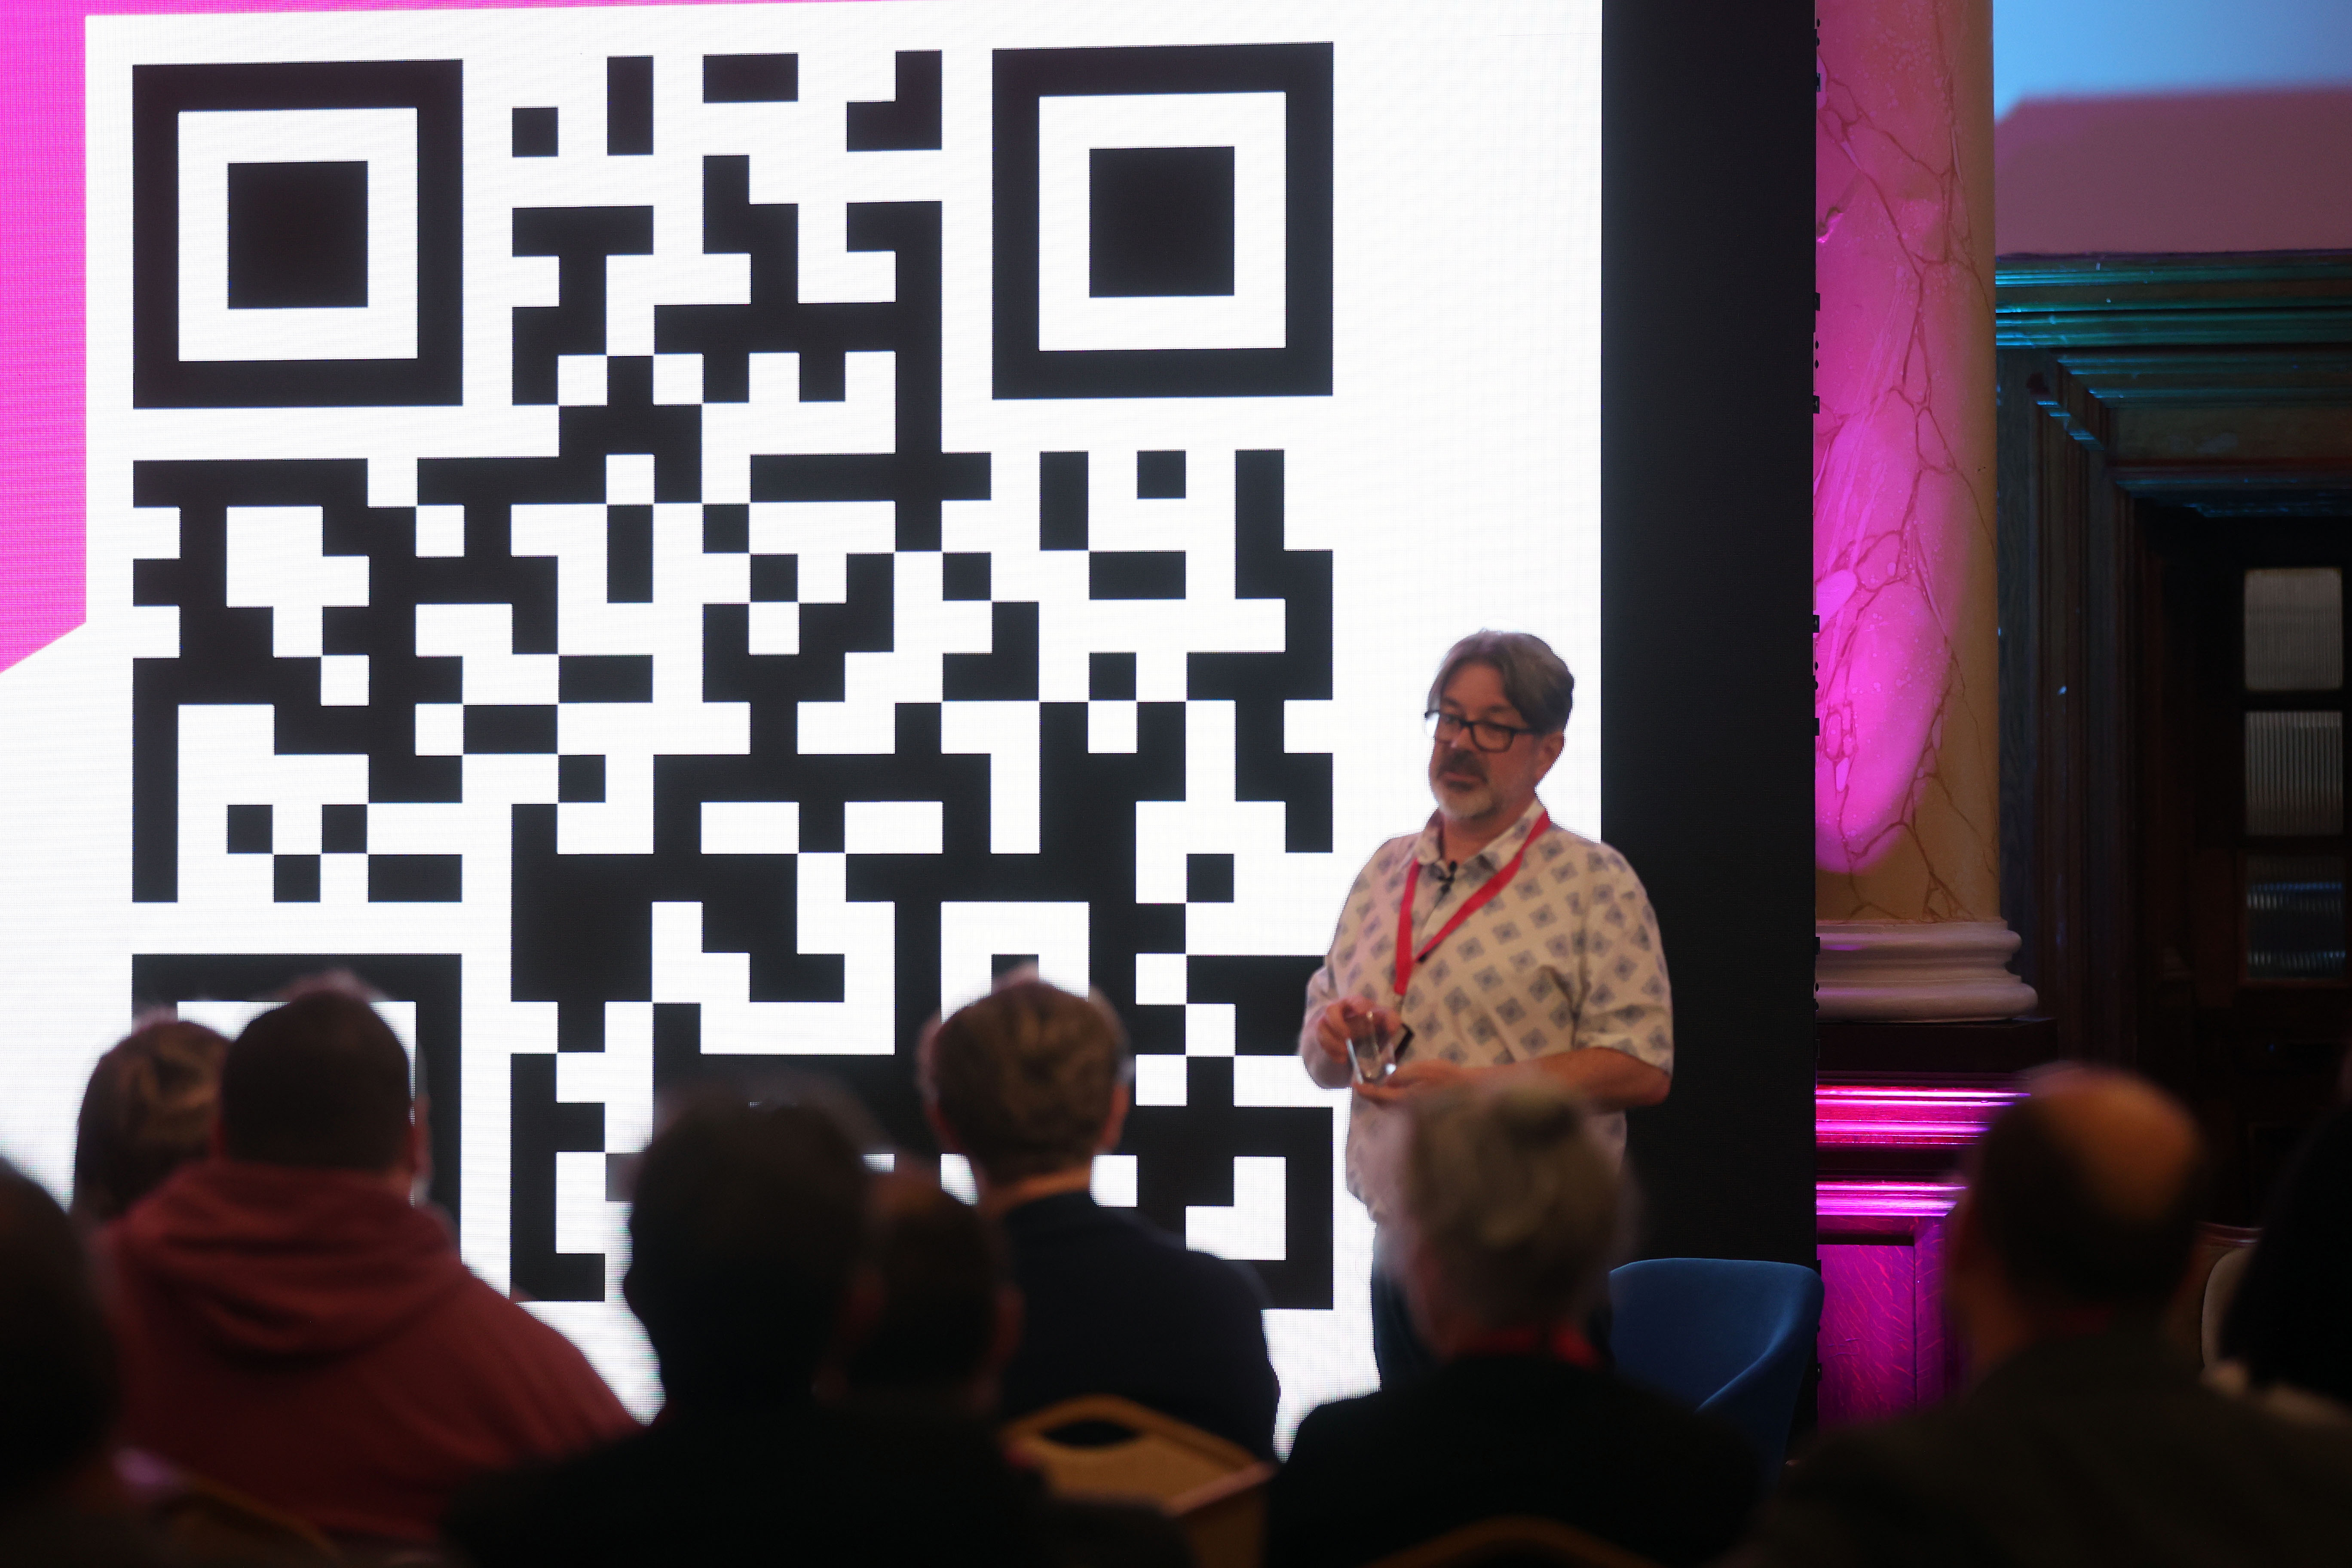 Robin Moore presents infront of a large screen featuring QR code